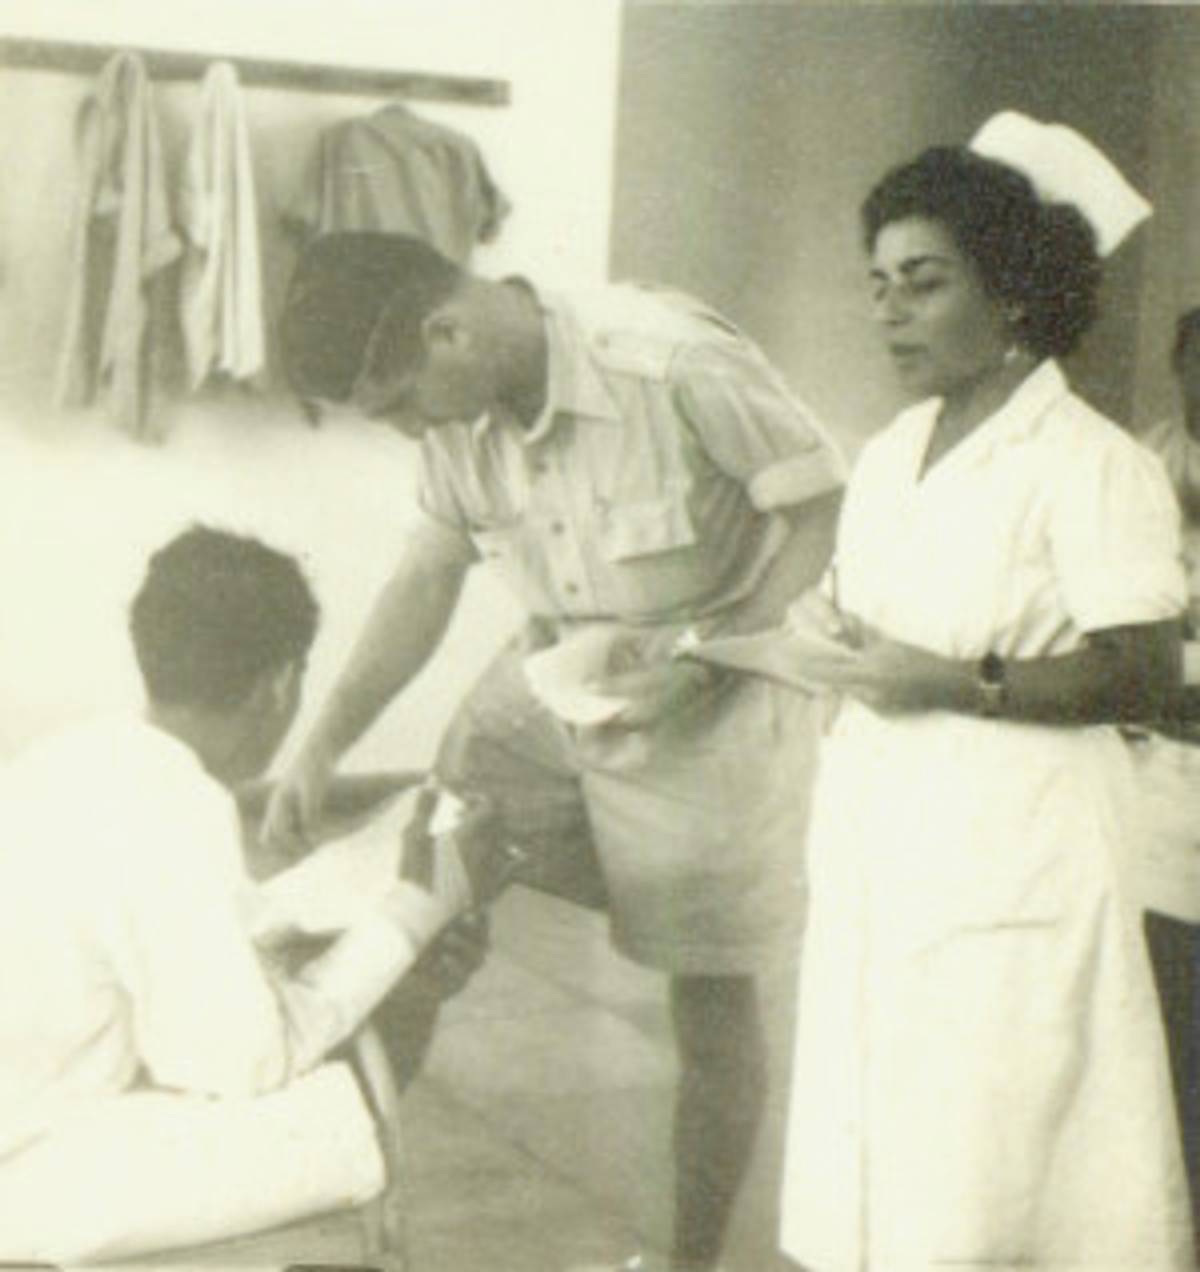 The author’s father (center) performing a ward round, 1948-1949.